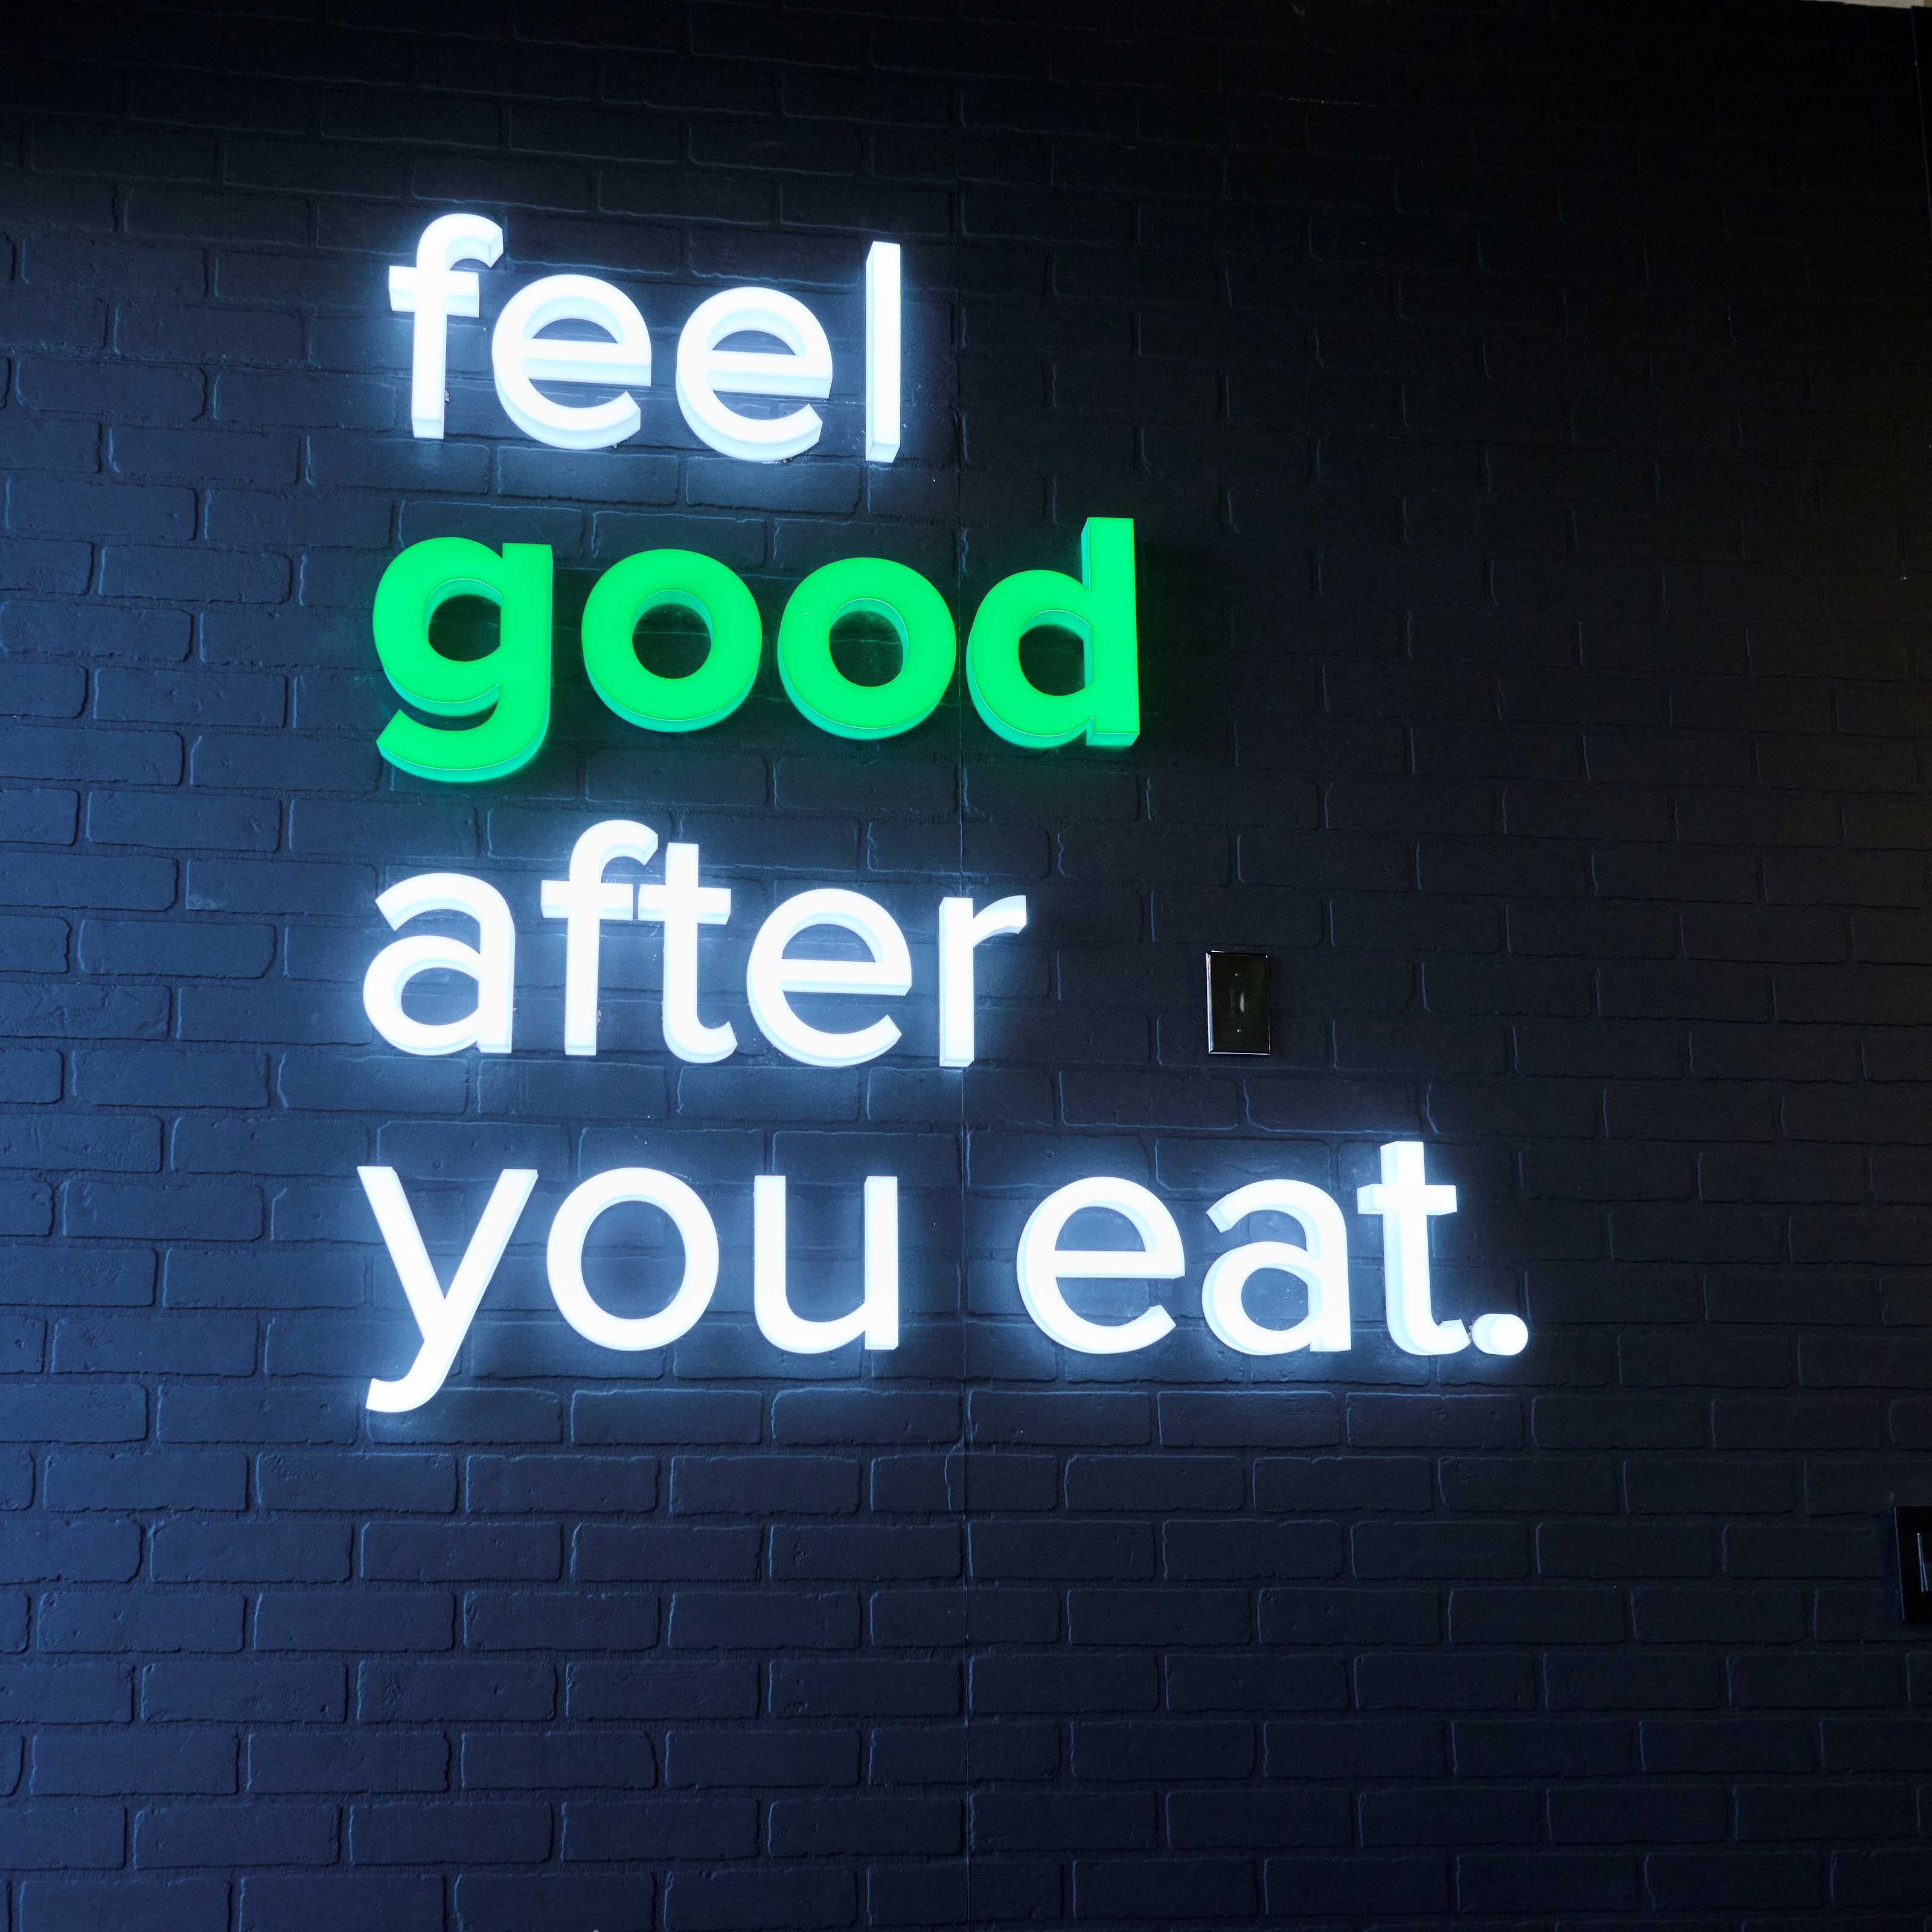 Food is fuel. At The Chopped Leaf you can love what you eat and feel good afterwards!